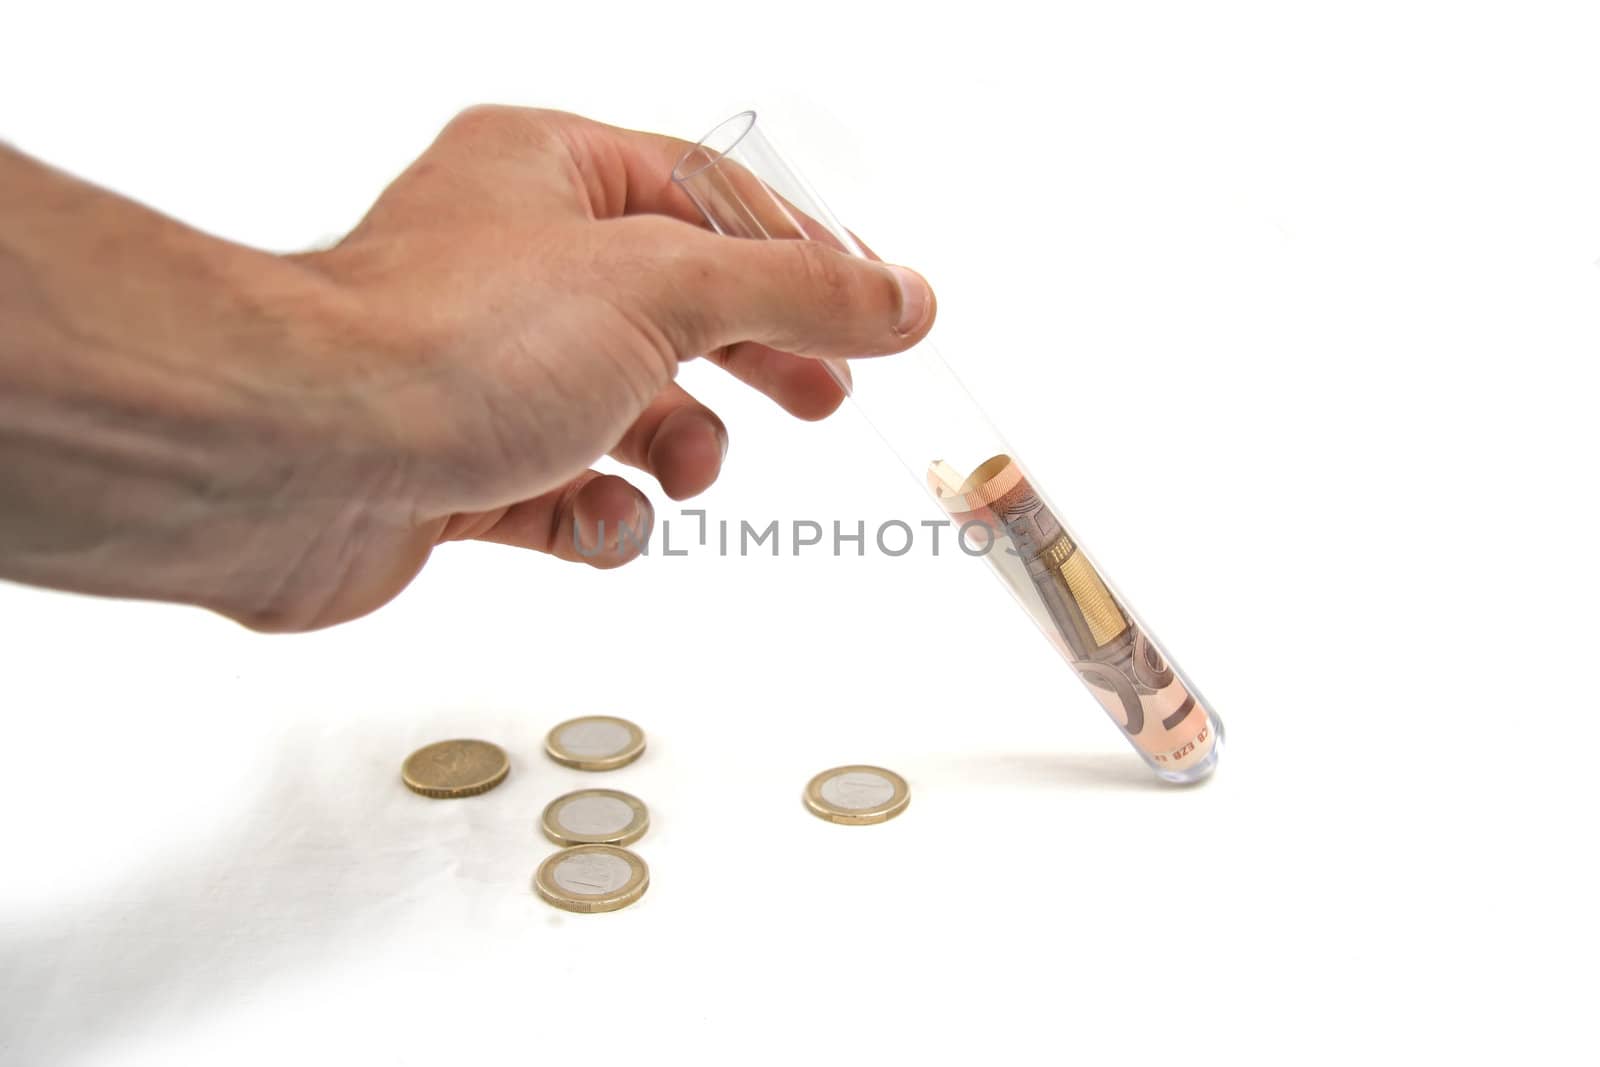 Euro bills being grown in laboratory glass test tubes by jfcalheiros